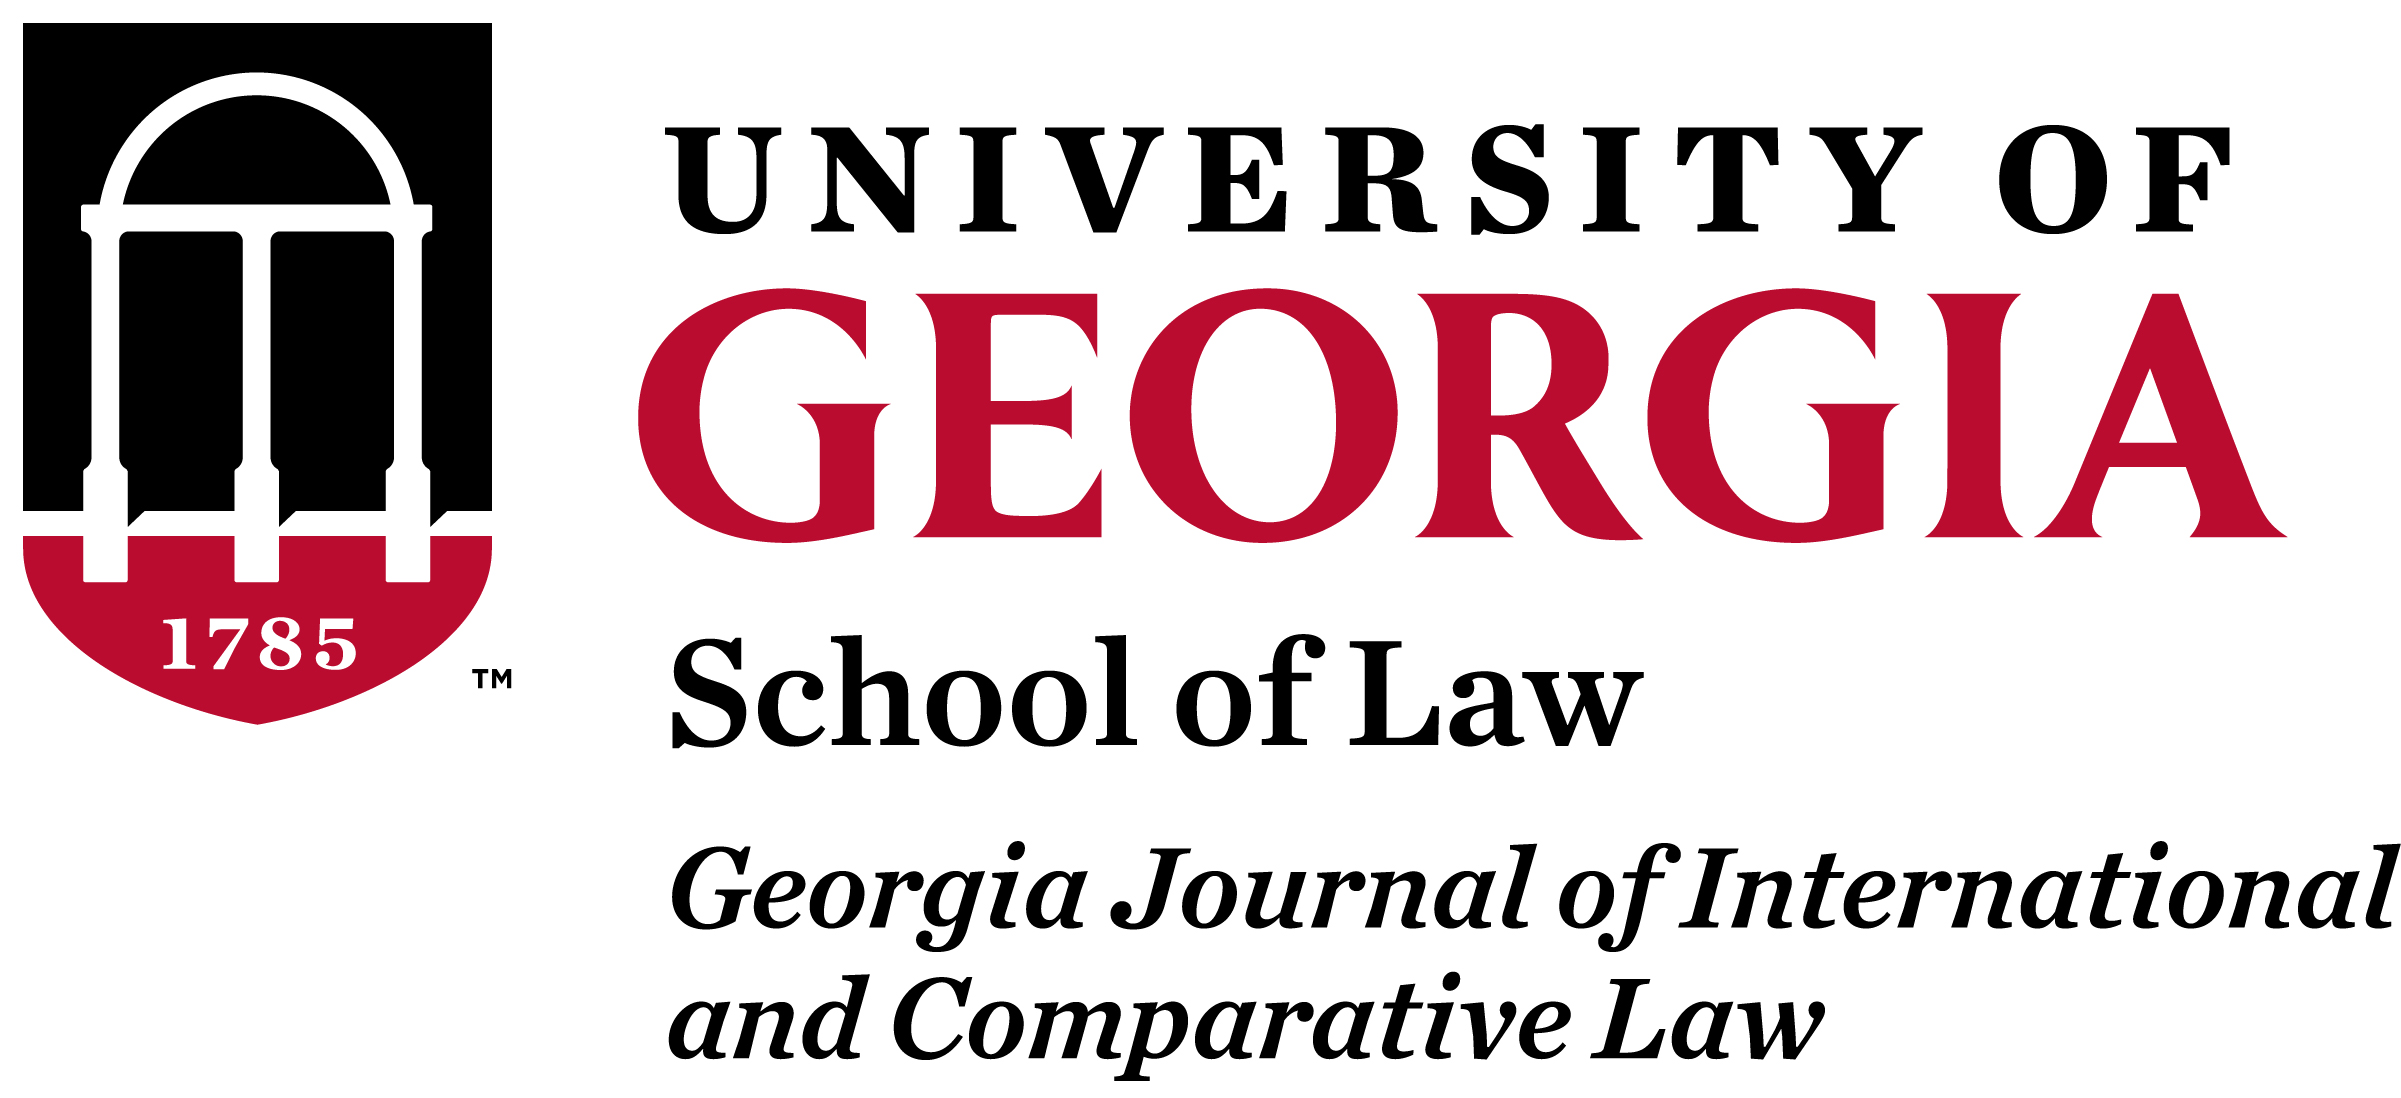 Georgia Journal of International and Comparative Law Vol 51 Domestic Shipping